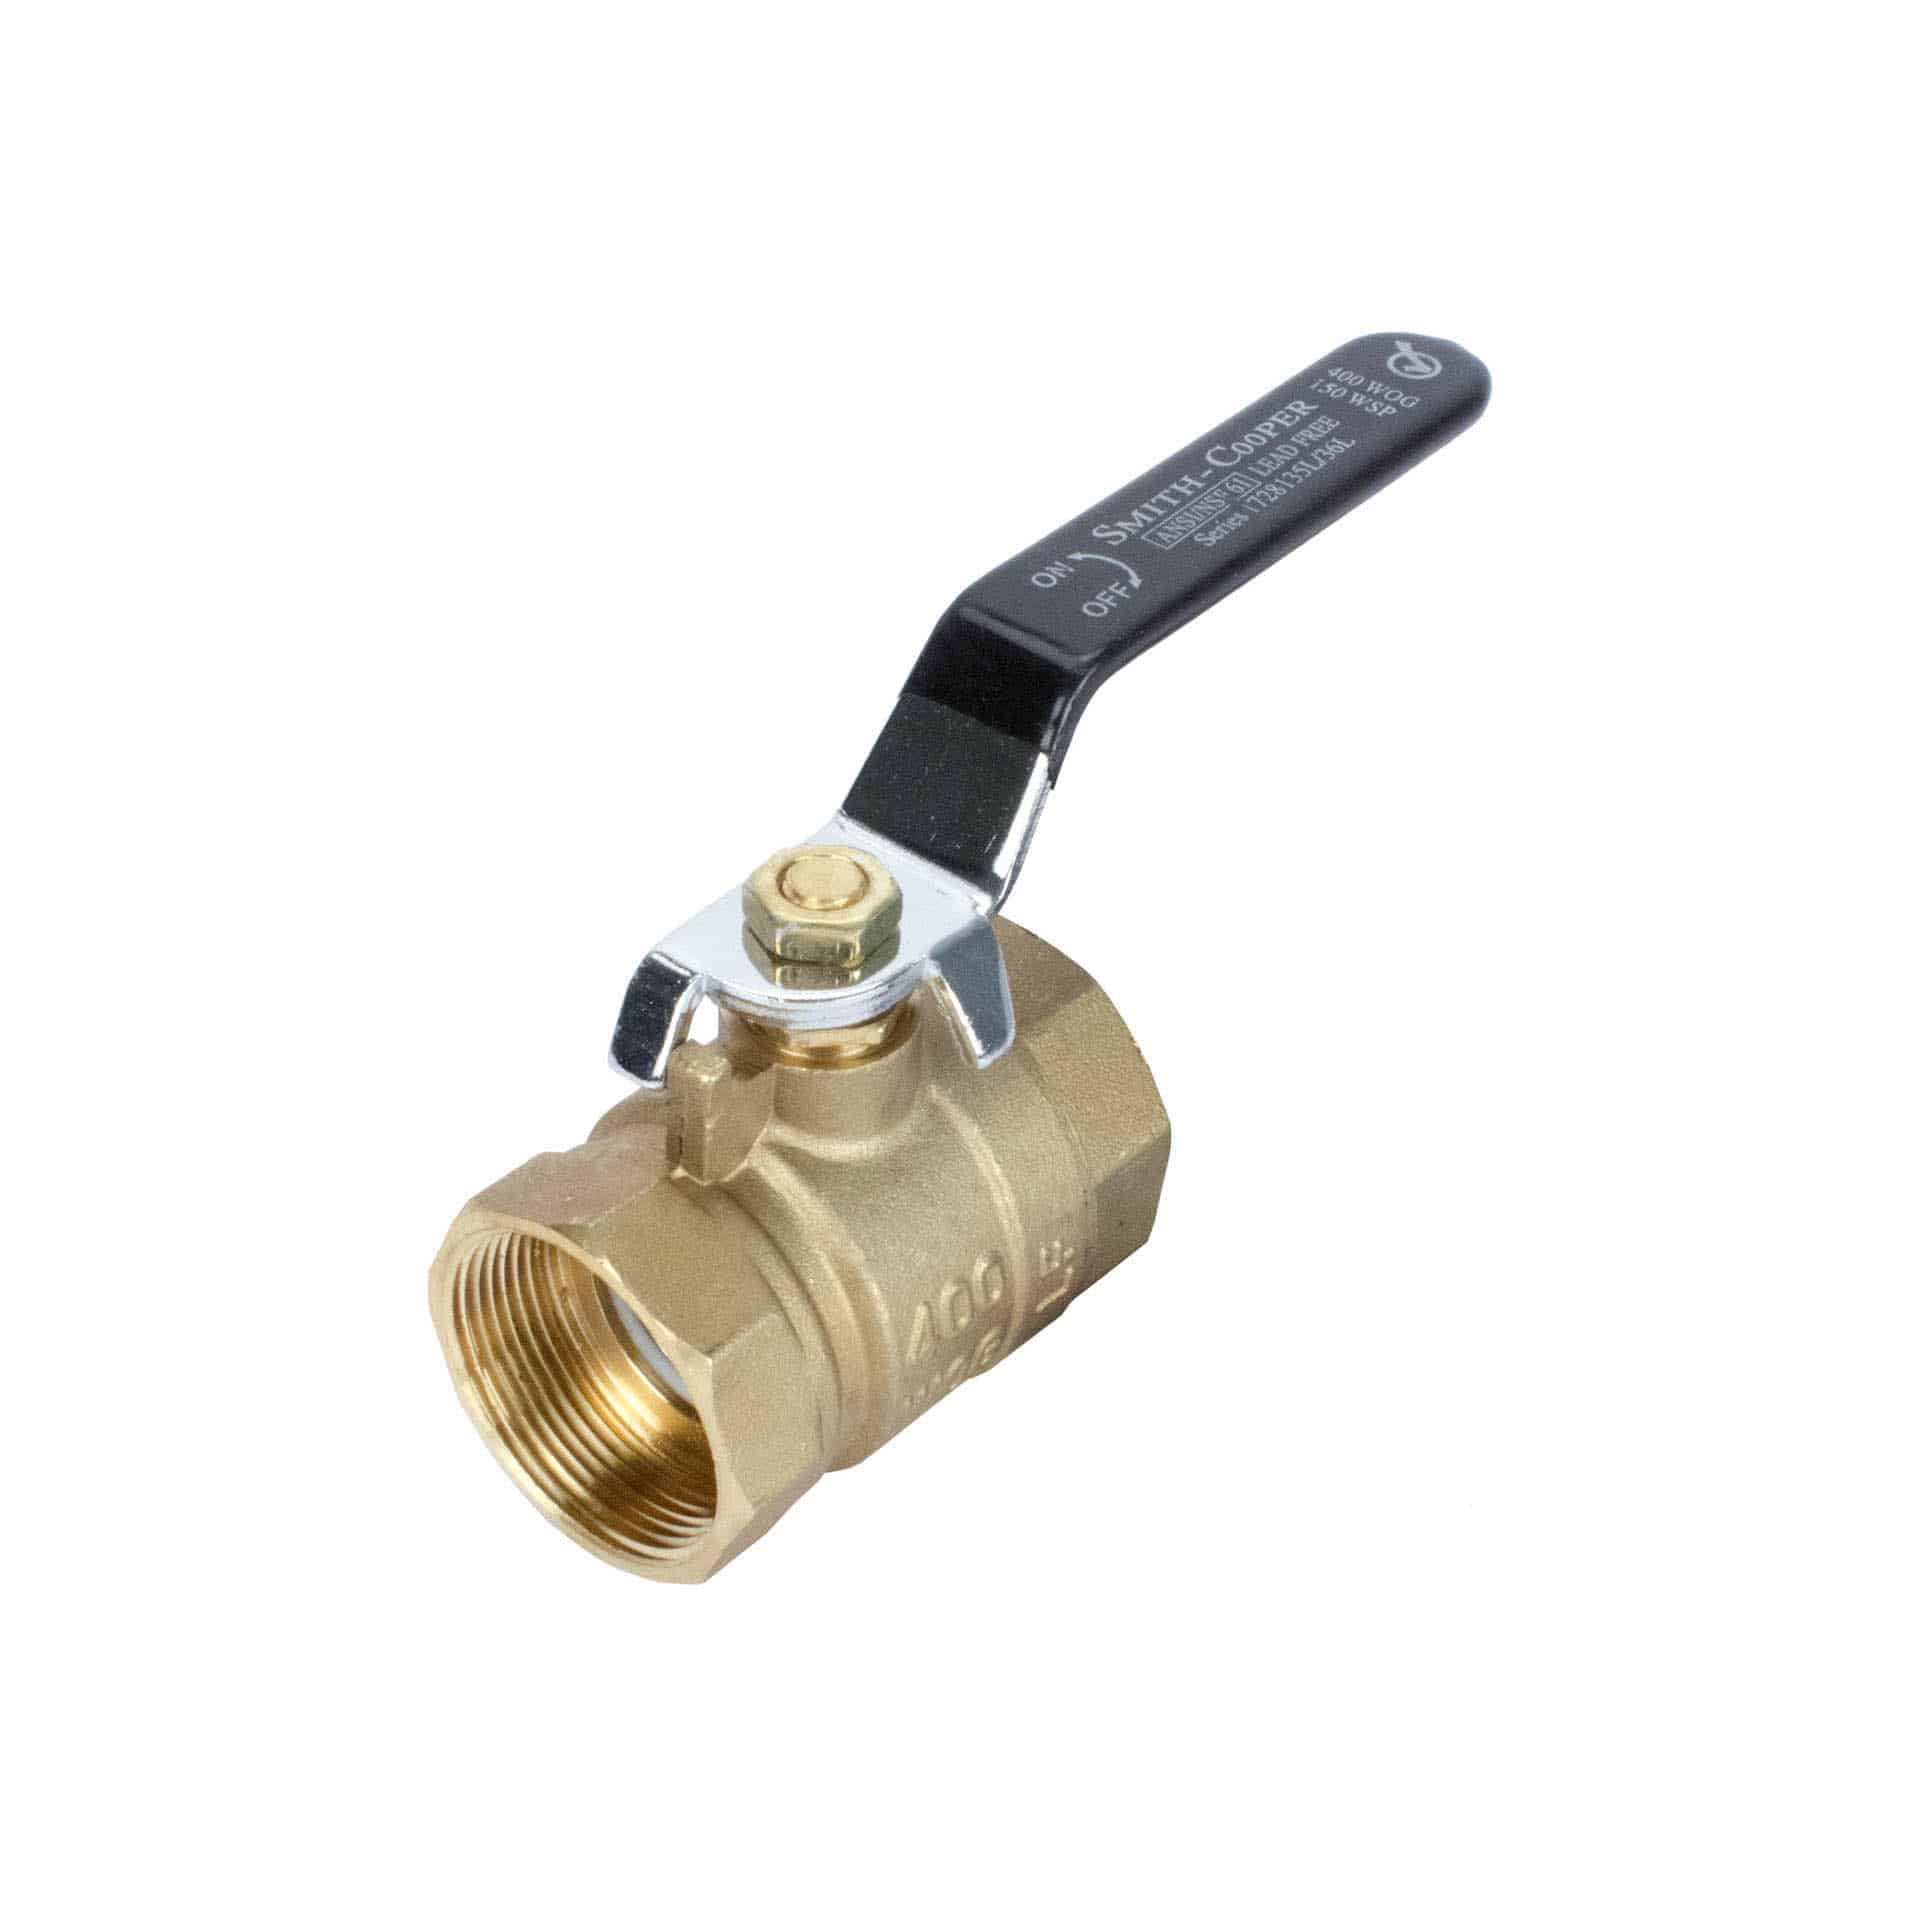 Buy Ball Valve online at Access Truck Parts